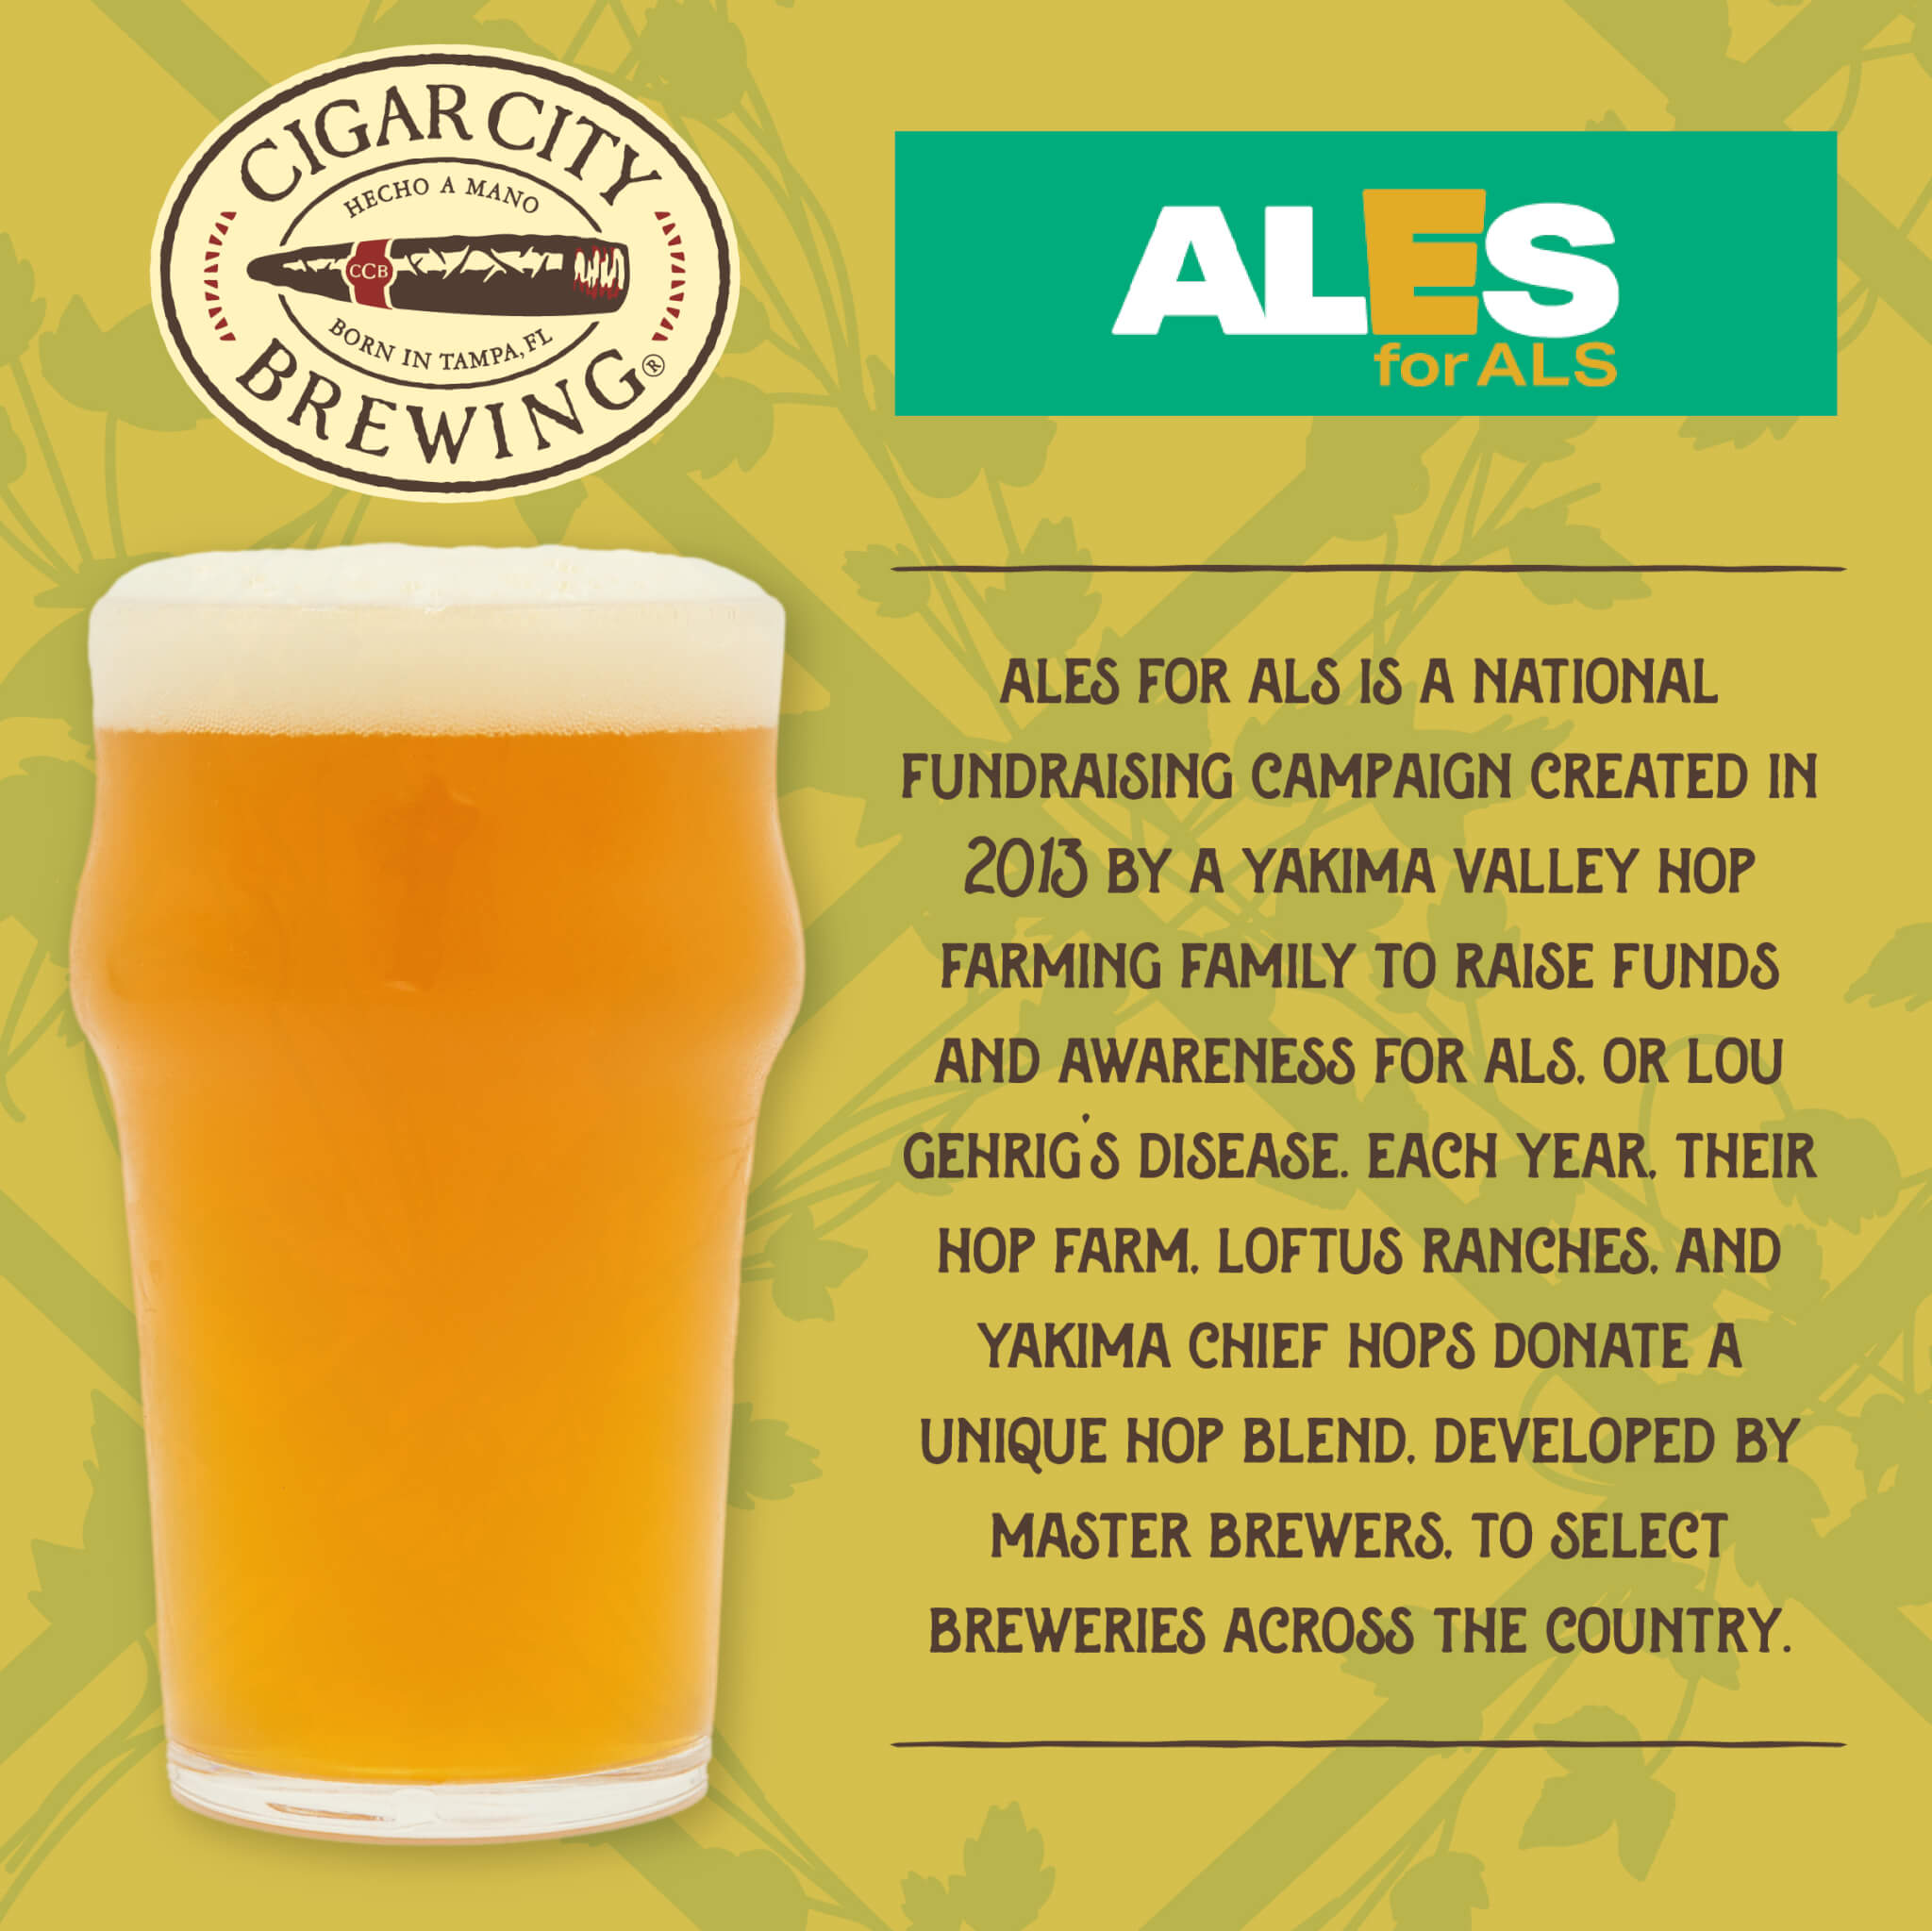 Cigar City Brewing releases their 2021 version of Ales for ALS.